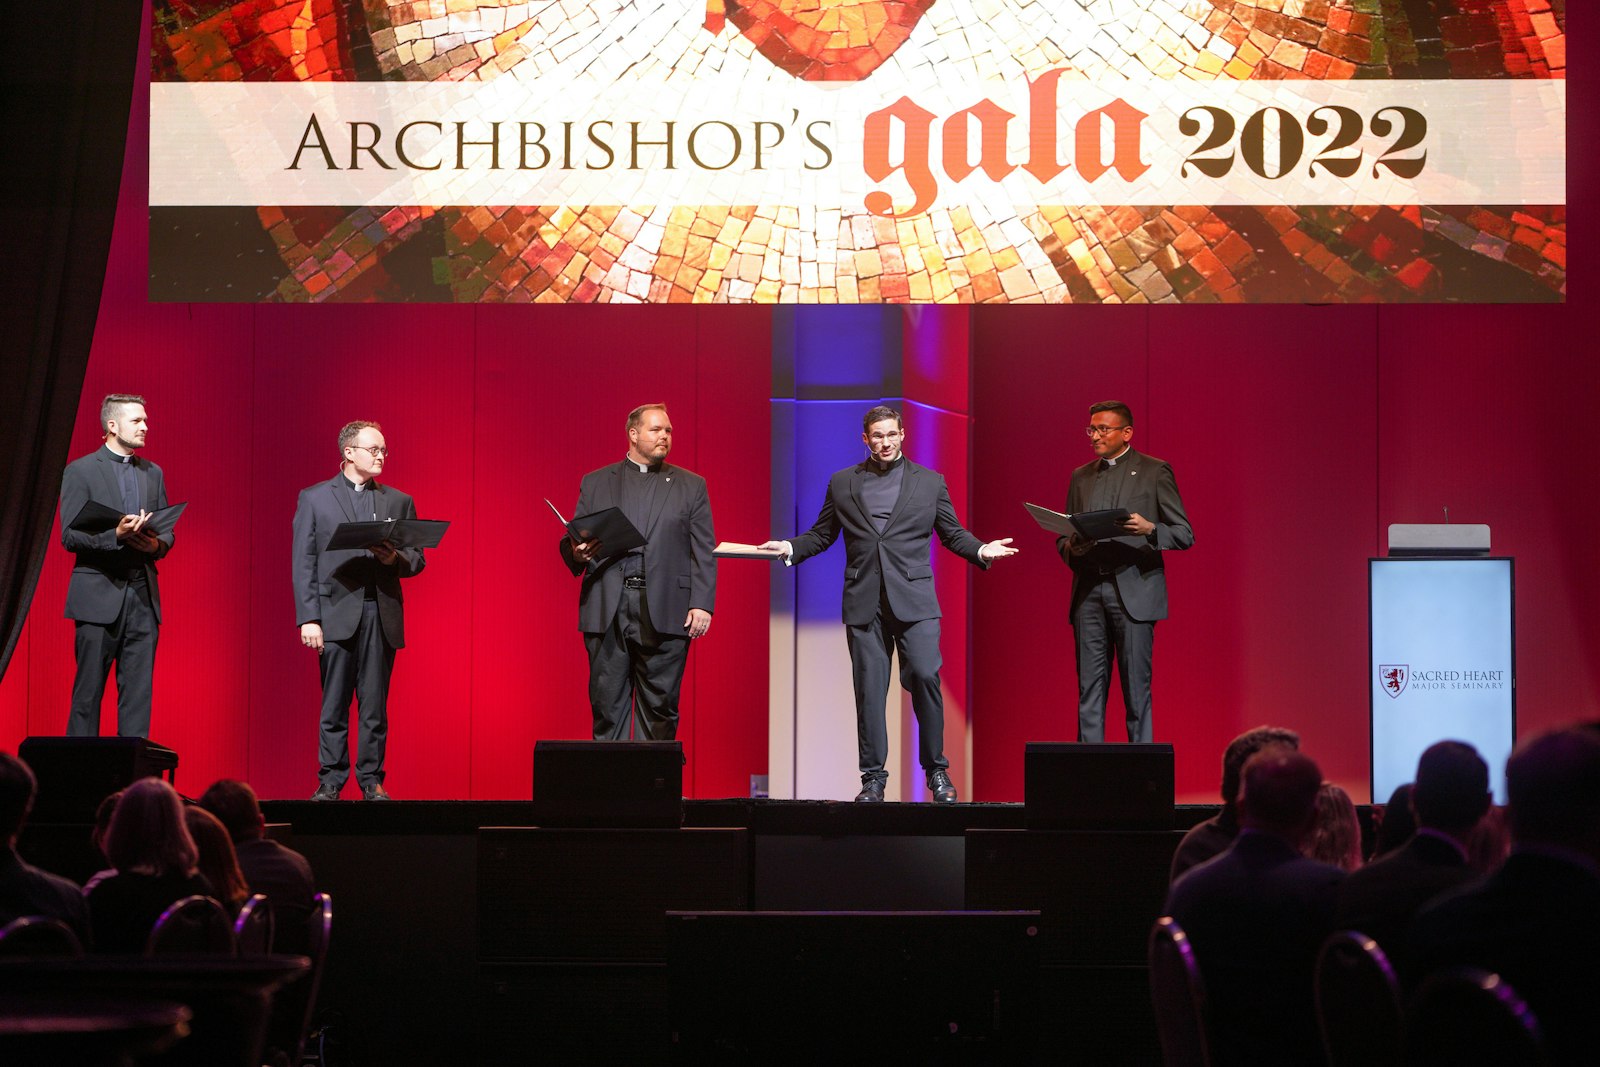 Five transitional deacons for the Archdiocese of Detroit served as emcees during the gala, including singing an a capella hymn dedicated to the Sacred Heart of Jesus. From left, Deacons Ryan Walters, Richard Dorsch Jr., Andrew Smith, Jeremy Schupbach and Michael Bruno Selvaraj entertain the crowd of 600 plus during the gala.